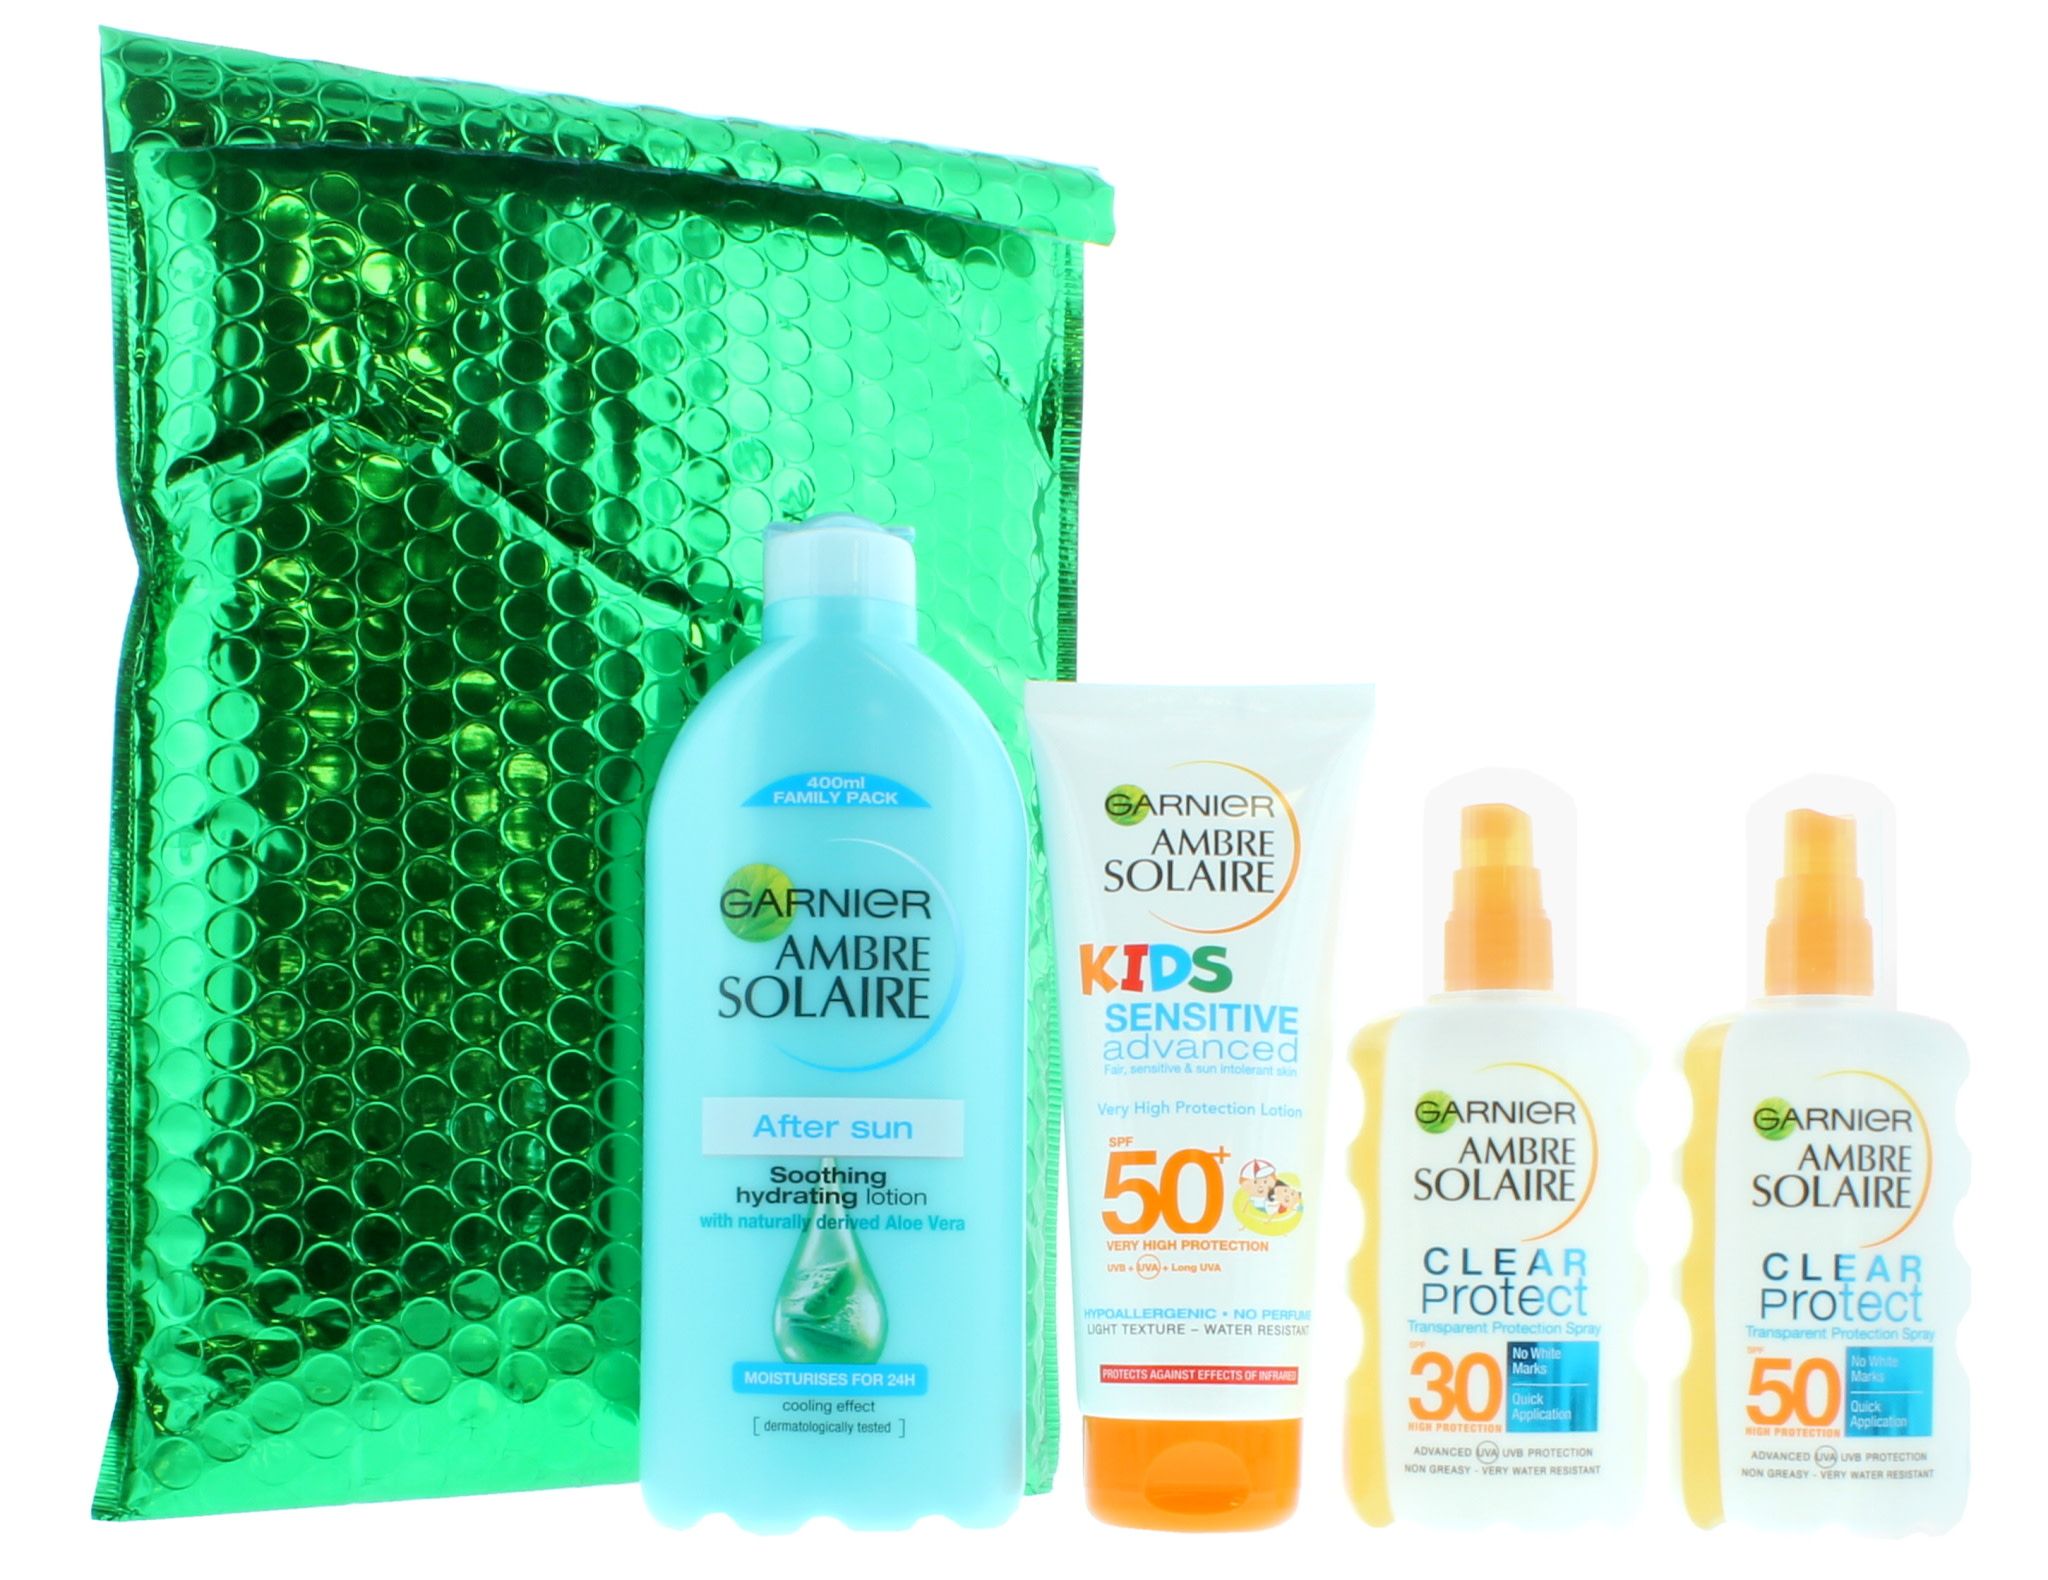 Ambre Solaire Family Sun Care Kit - After Sun + 1 x SPF30 & 1 x SPF50 and Kids SPF50. Clear Protect Sun Cream Spray - This high protection, transparent formula leaves no white marks. Non-greasy, water-resistant. Sensitive Enhanced Kids Lotion - This very high protection SPF50+ lotion is specially developed for childrens’ delicate and sensitive skin; hypoallergenic, no perfumes or colourants. Family Size After Sun Lotion - Garnier after sun is enriched with naturally derived Aloe Vera; the formula provides 24 hours hydration and soothes and nourishes skin. All of Garnier sun protection products contain UVA and UVB protection and is tested under paediatric control. Garnier’s research into sun protection is recognised by the British skin foundation.